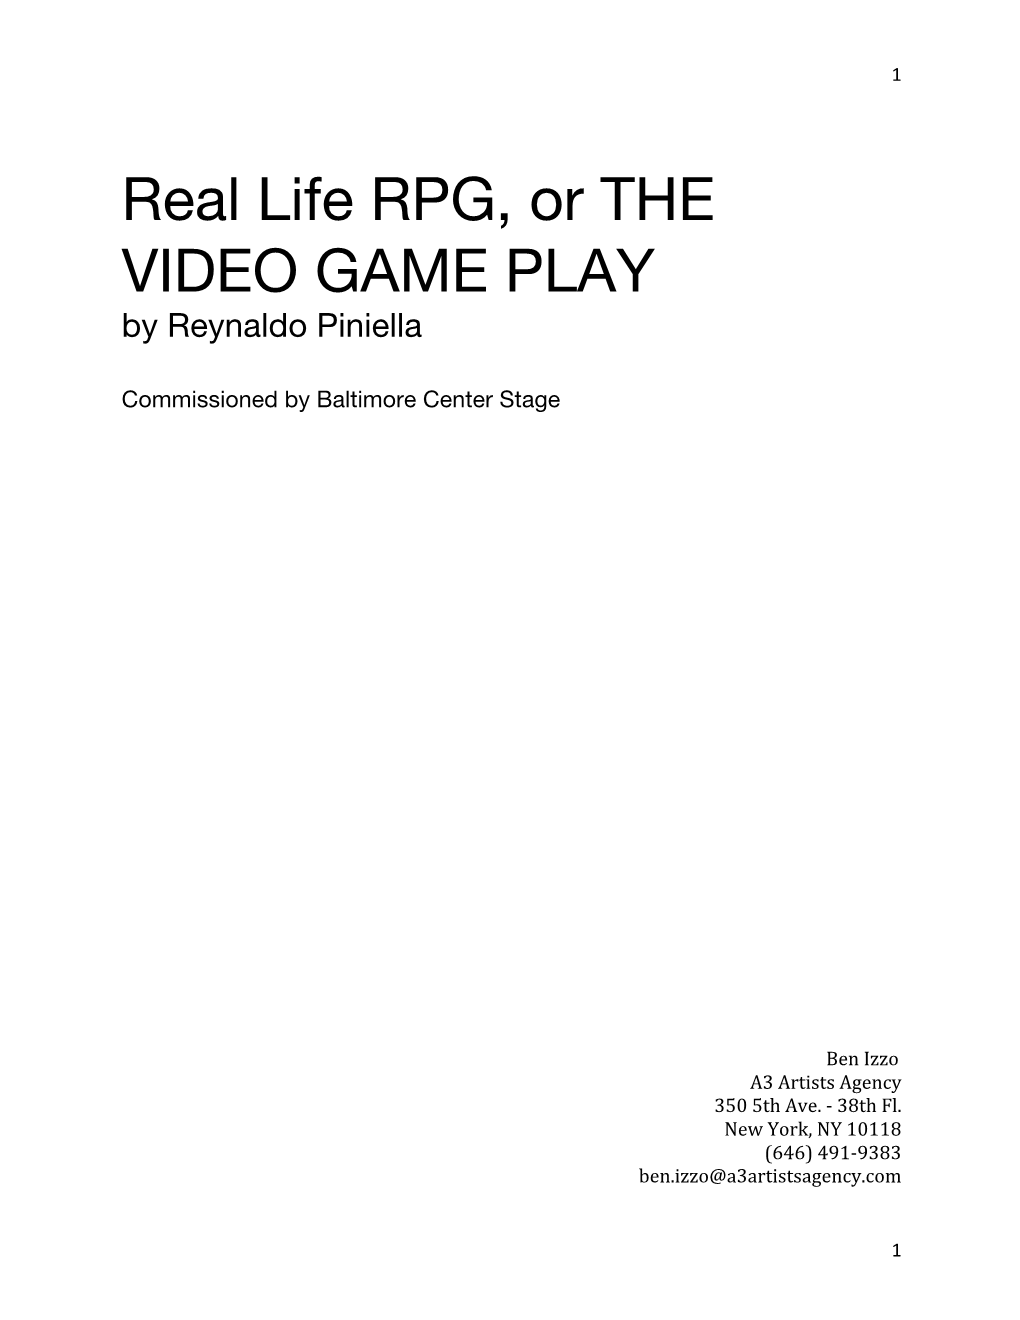 Real Life RPG, Or the VIDEO GAME PLAY by Reynaldo Piniella